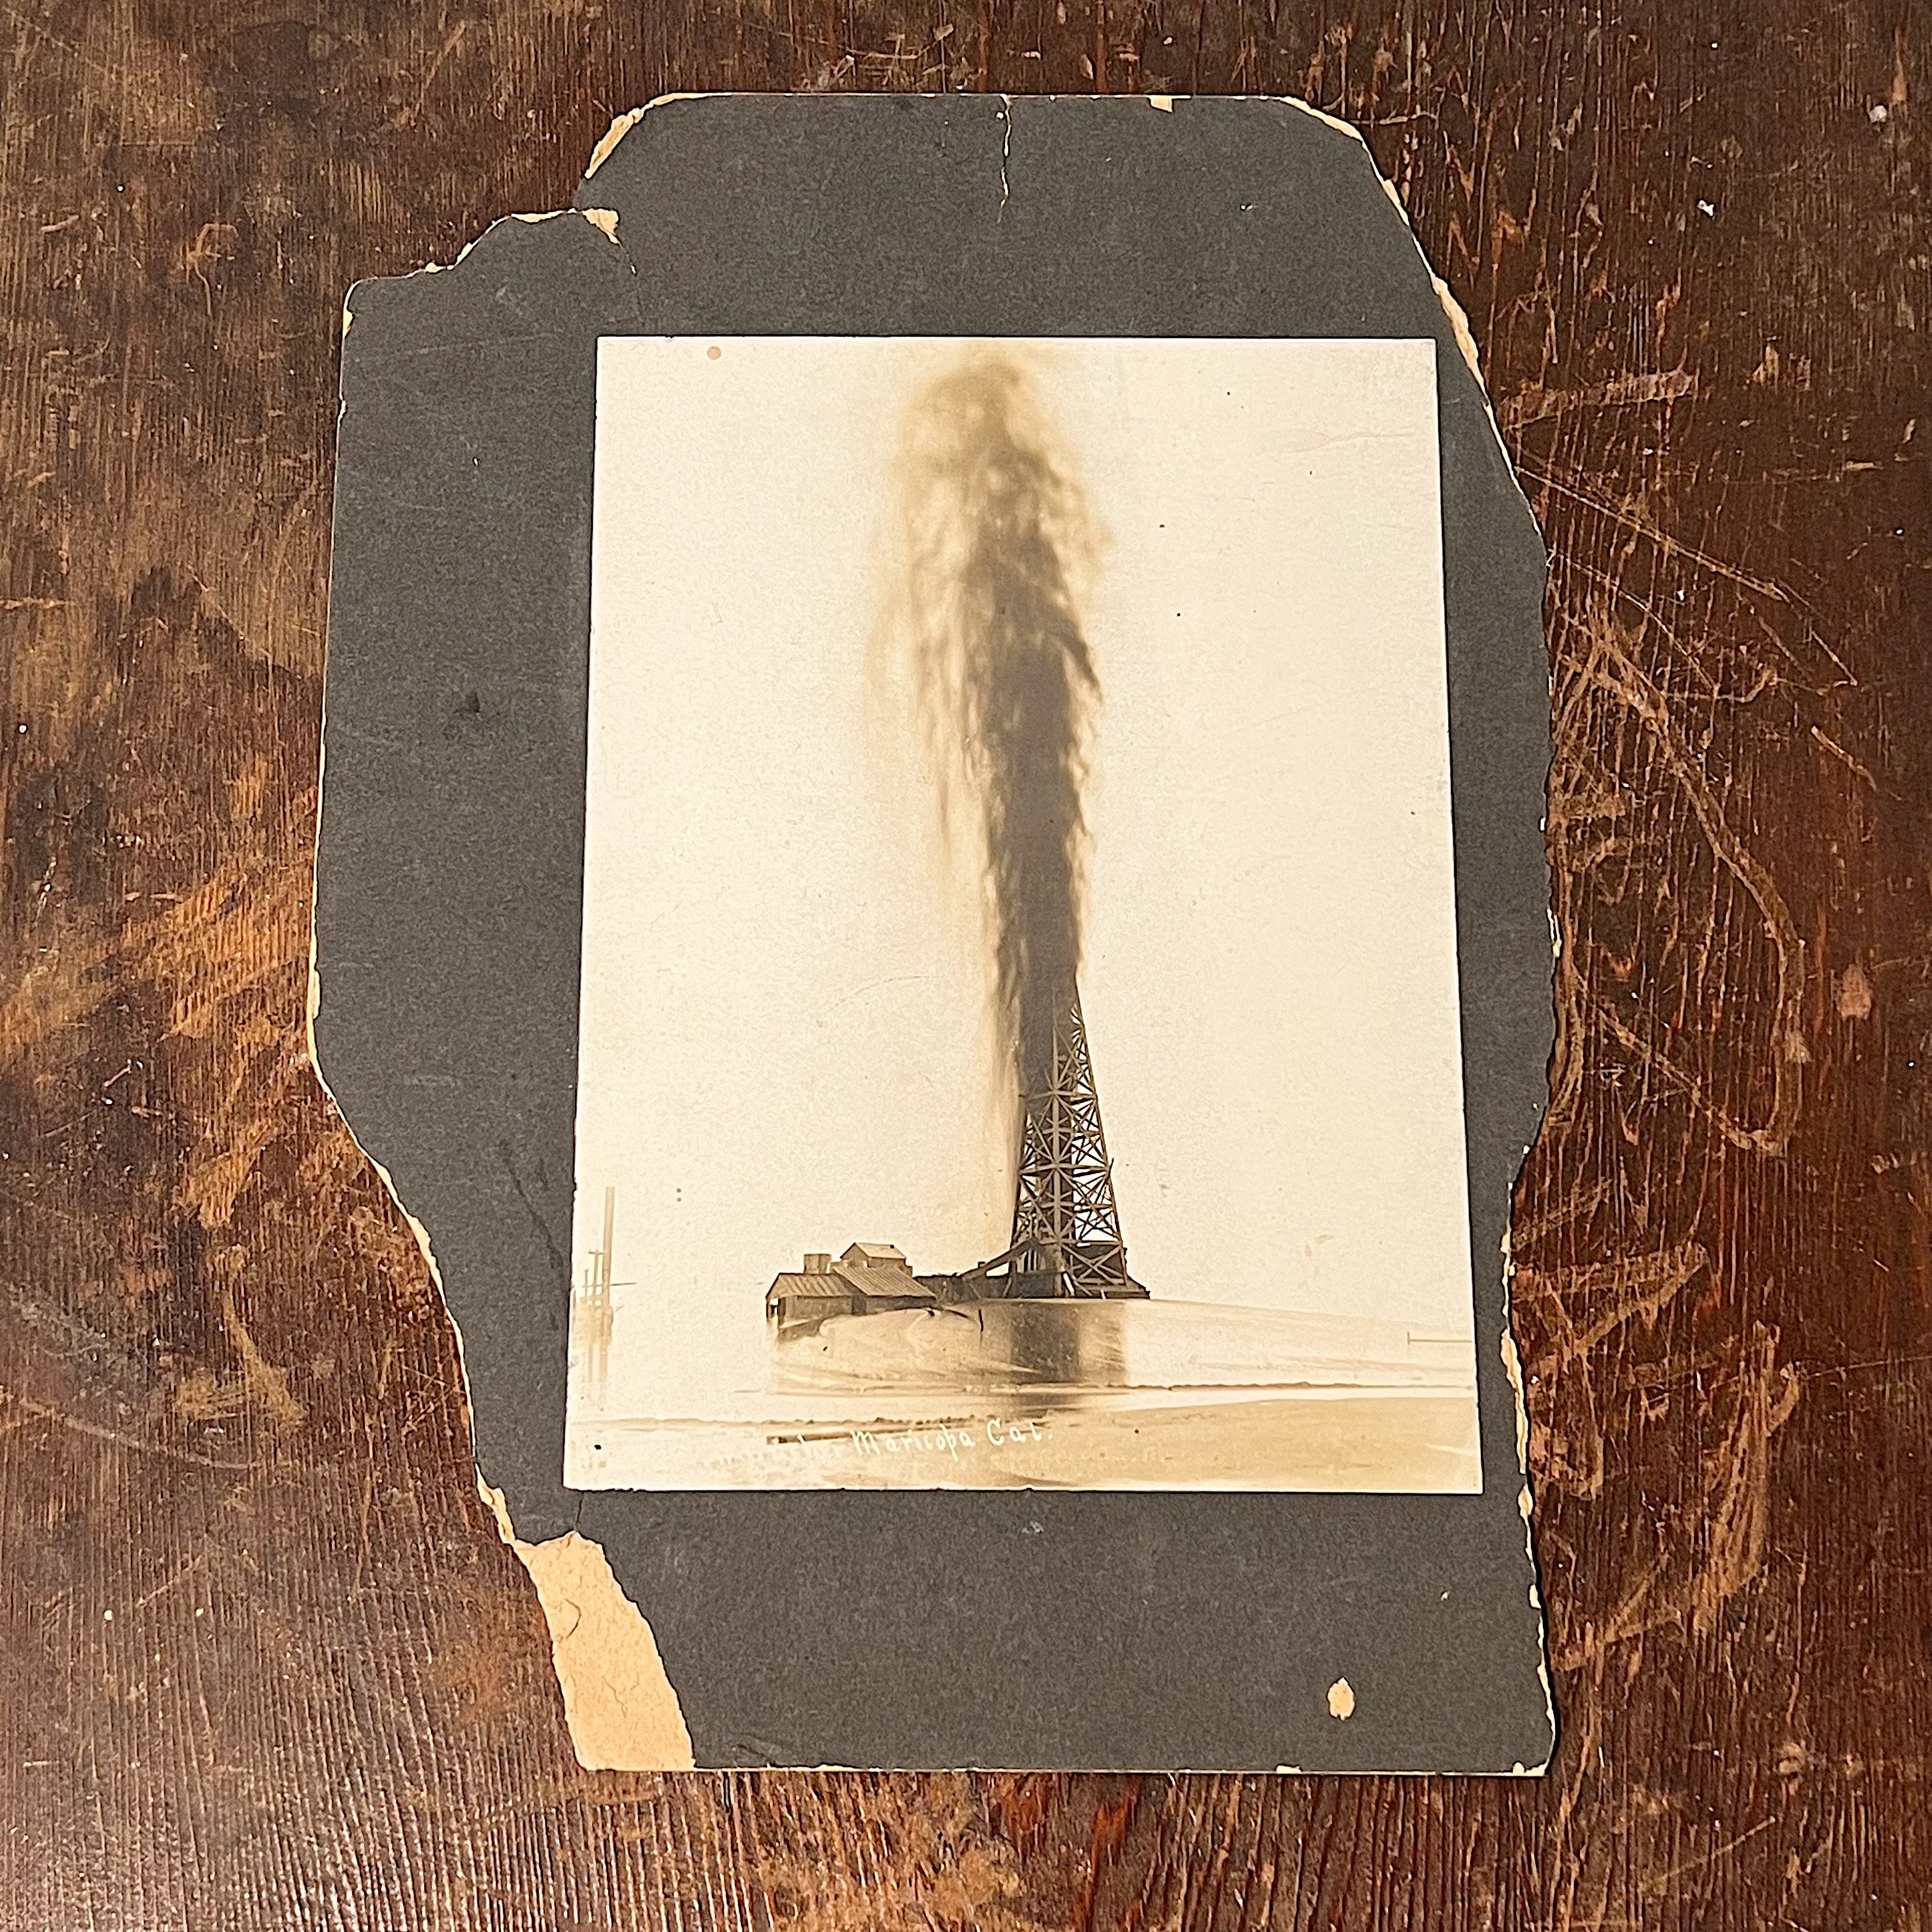 Antique Oil Gusher Photograph from Maricopa California